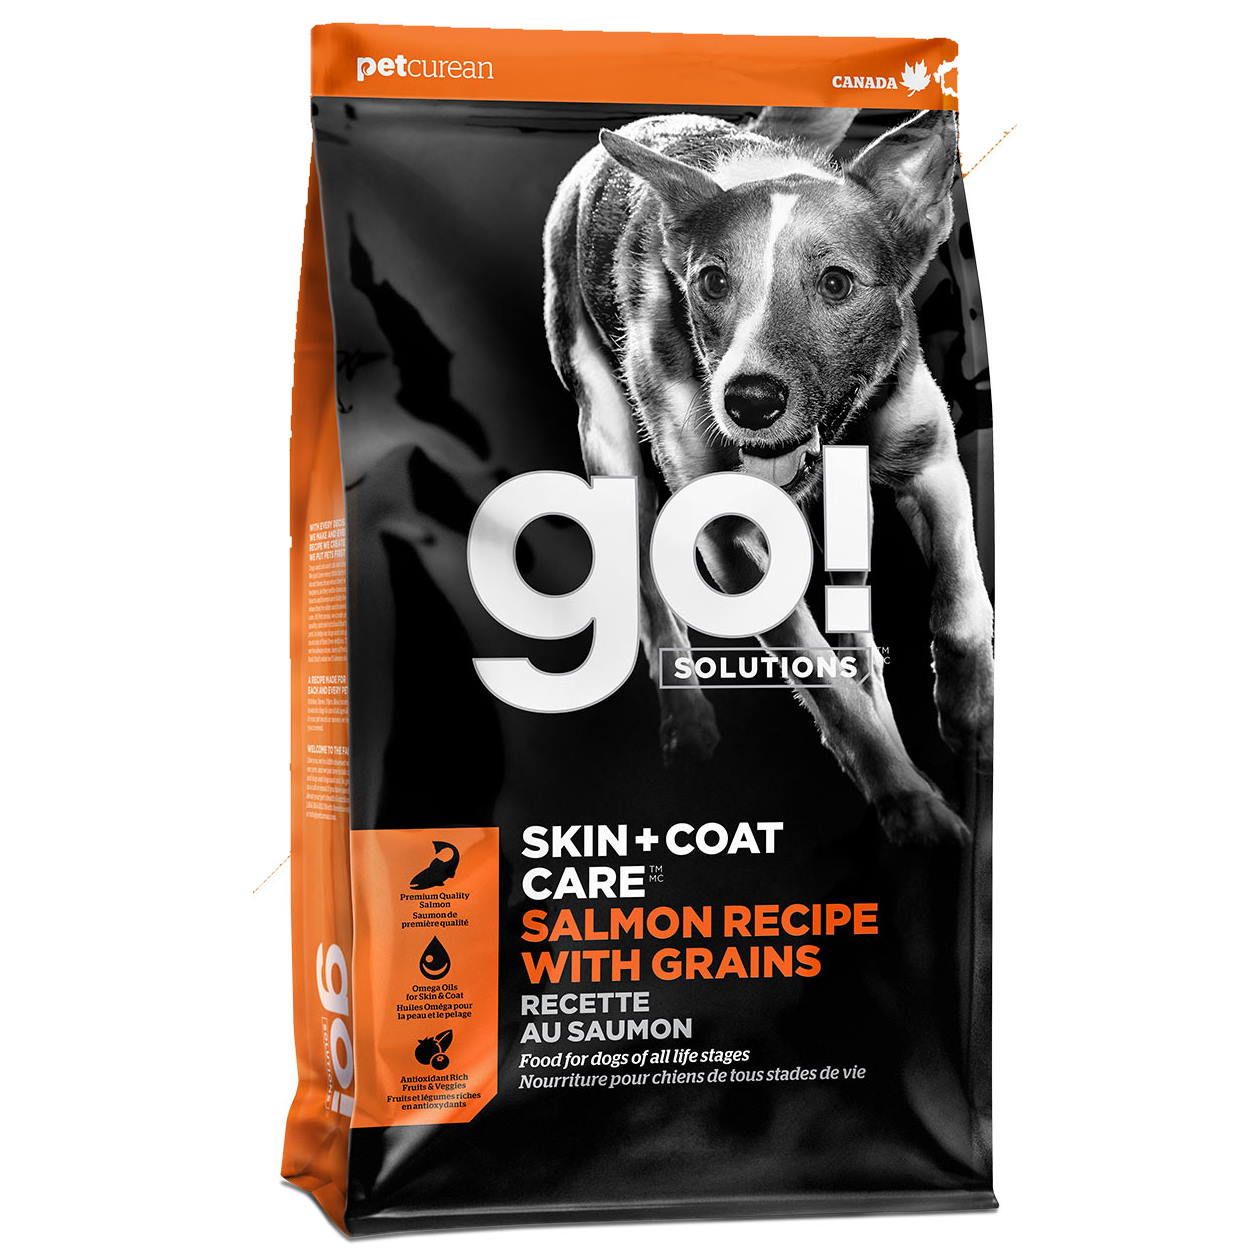 Go! Solutions Skin + Coat Care Salmon Recipe with Grains Dry Dog Food 25-lb Bag